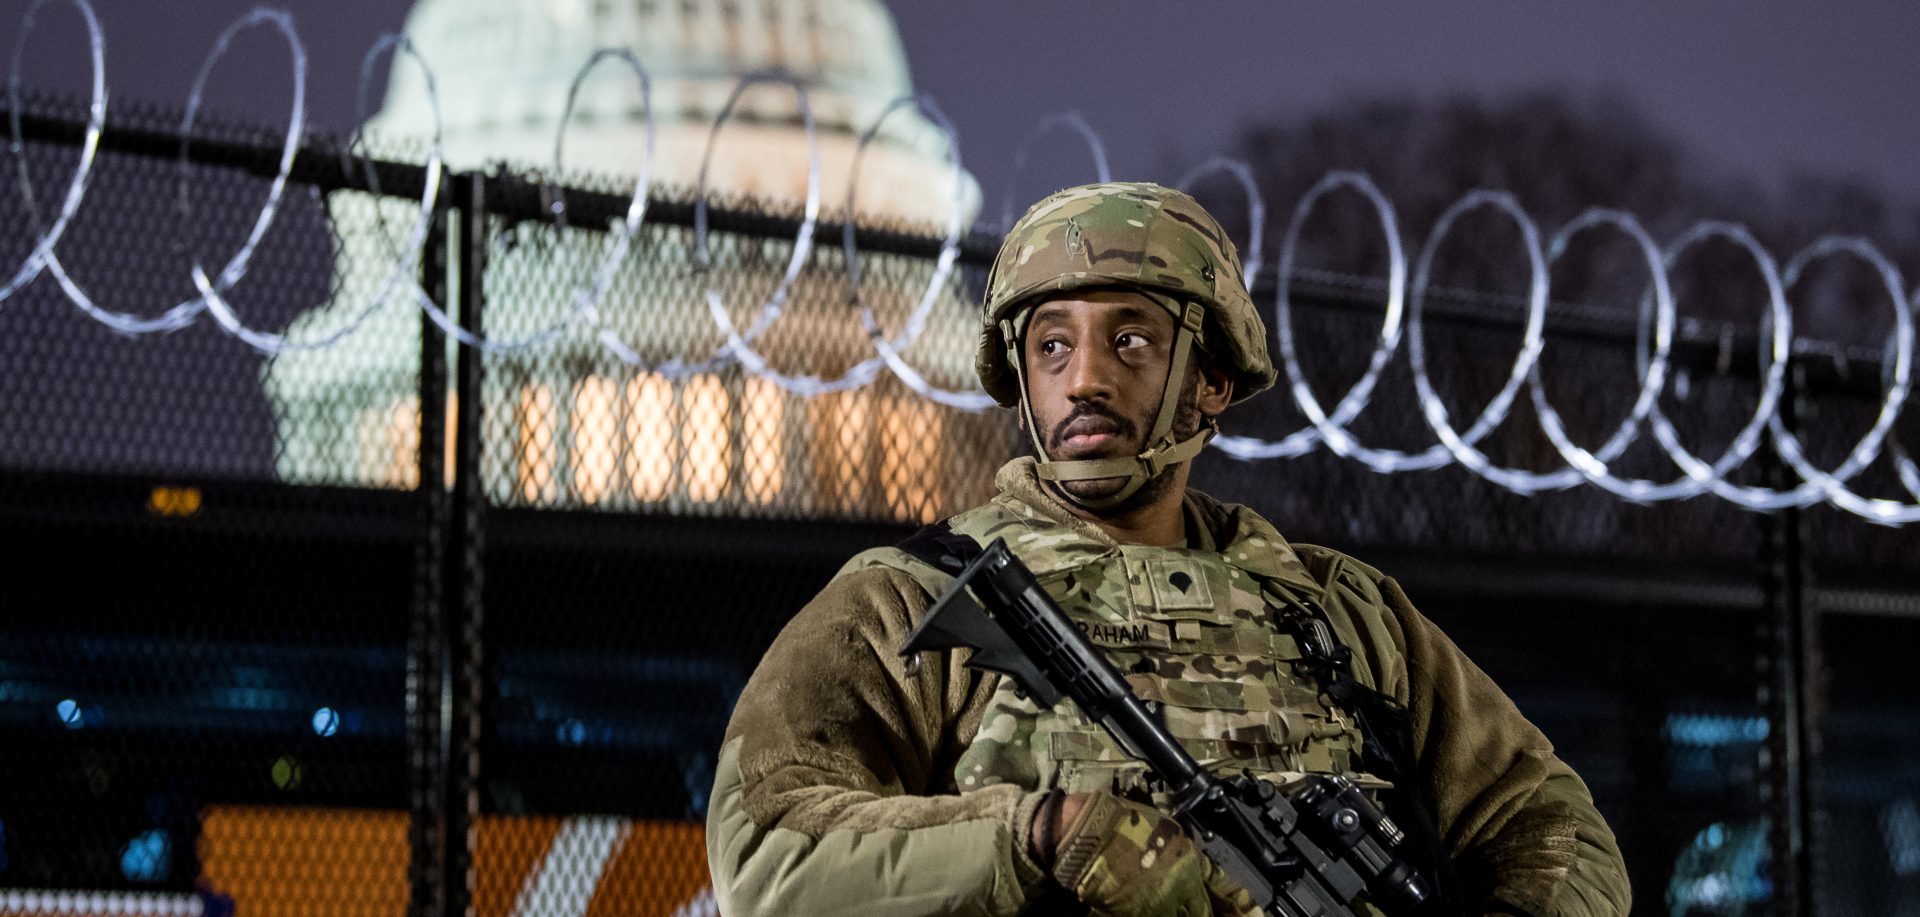 A member of the Virginia National Guard stands outside the razor wire fencing surrounding the U.S. Capitol on Friday. Up to 25,000 troops are expected by Inauguration Day.